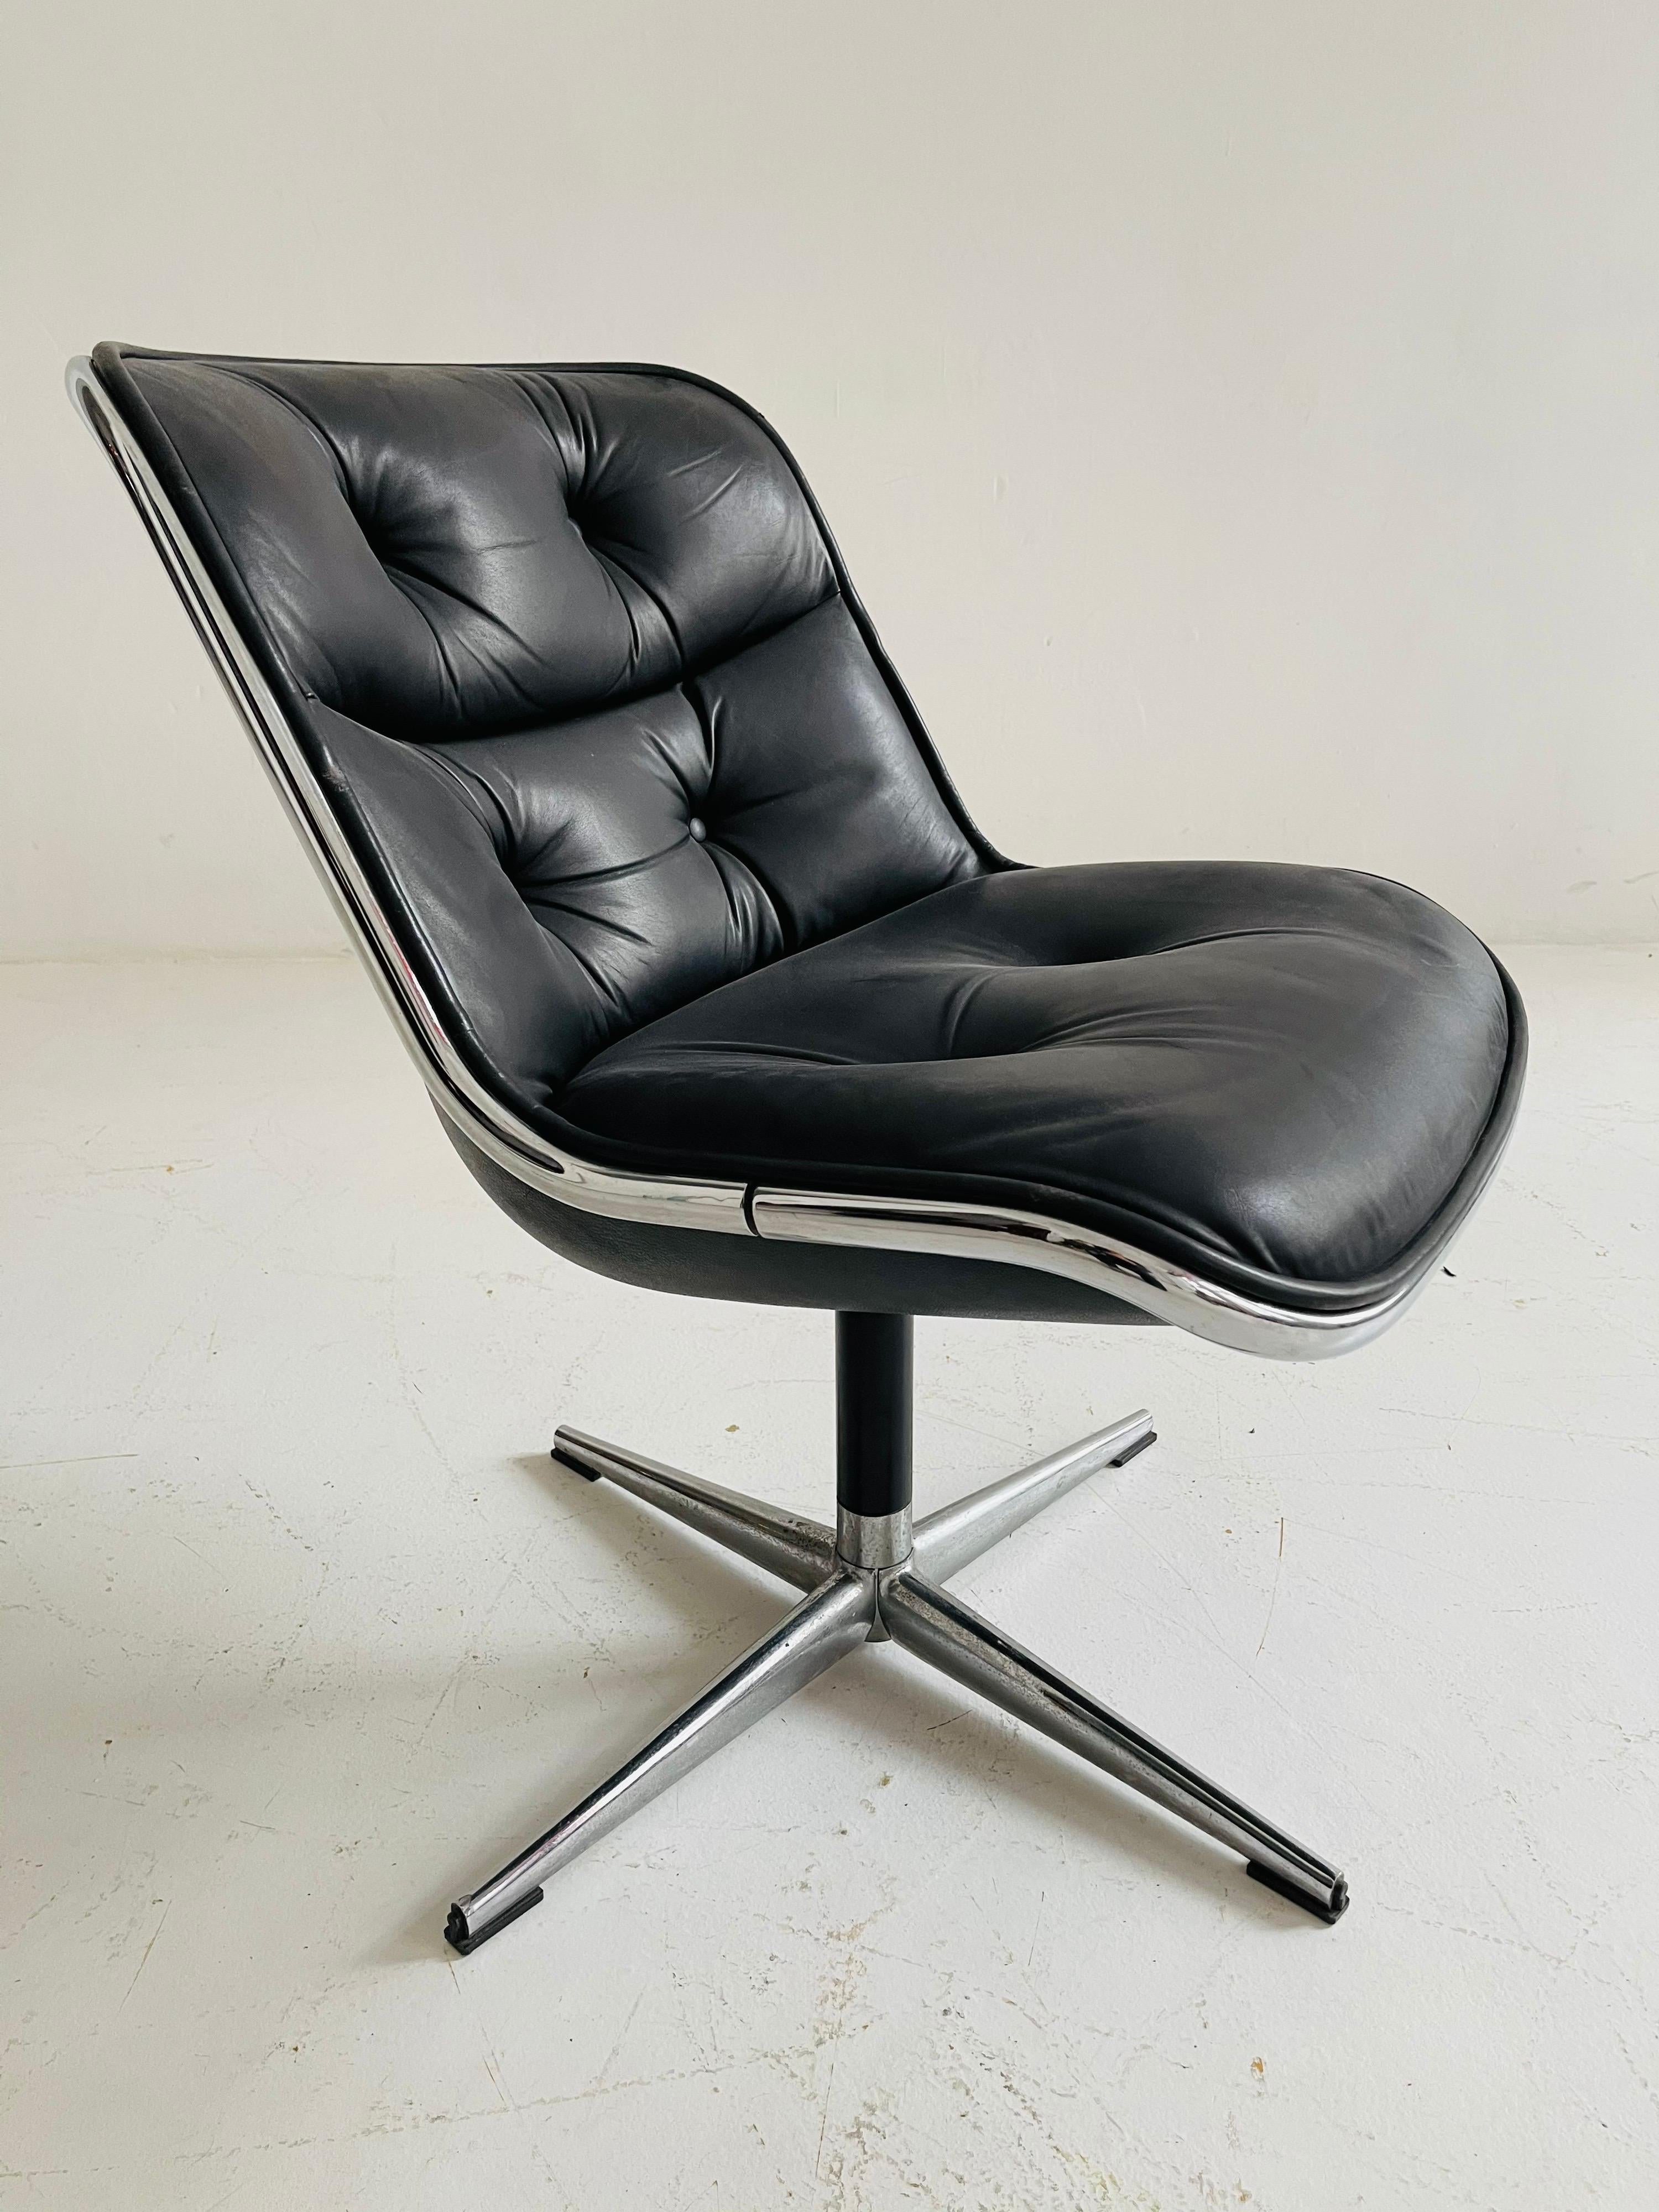 Pollack Executive Chair by Charles Pollack for Knoll Set of Six Leather, 1960s For Sale 8